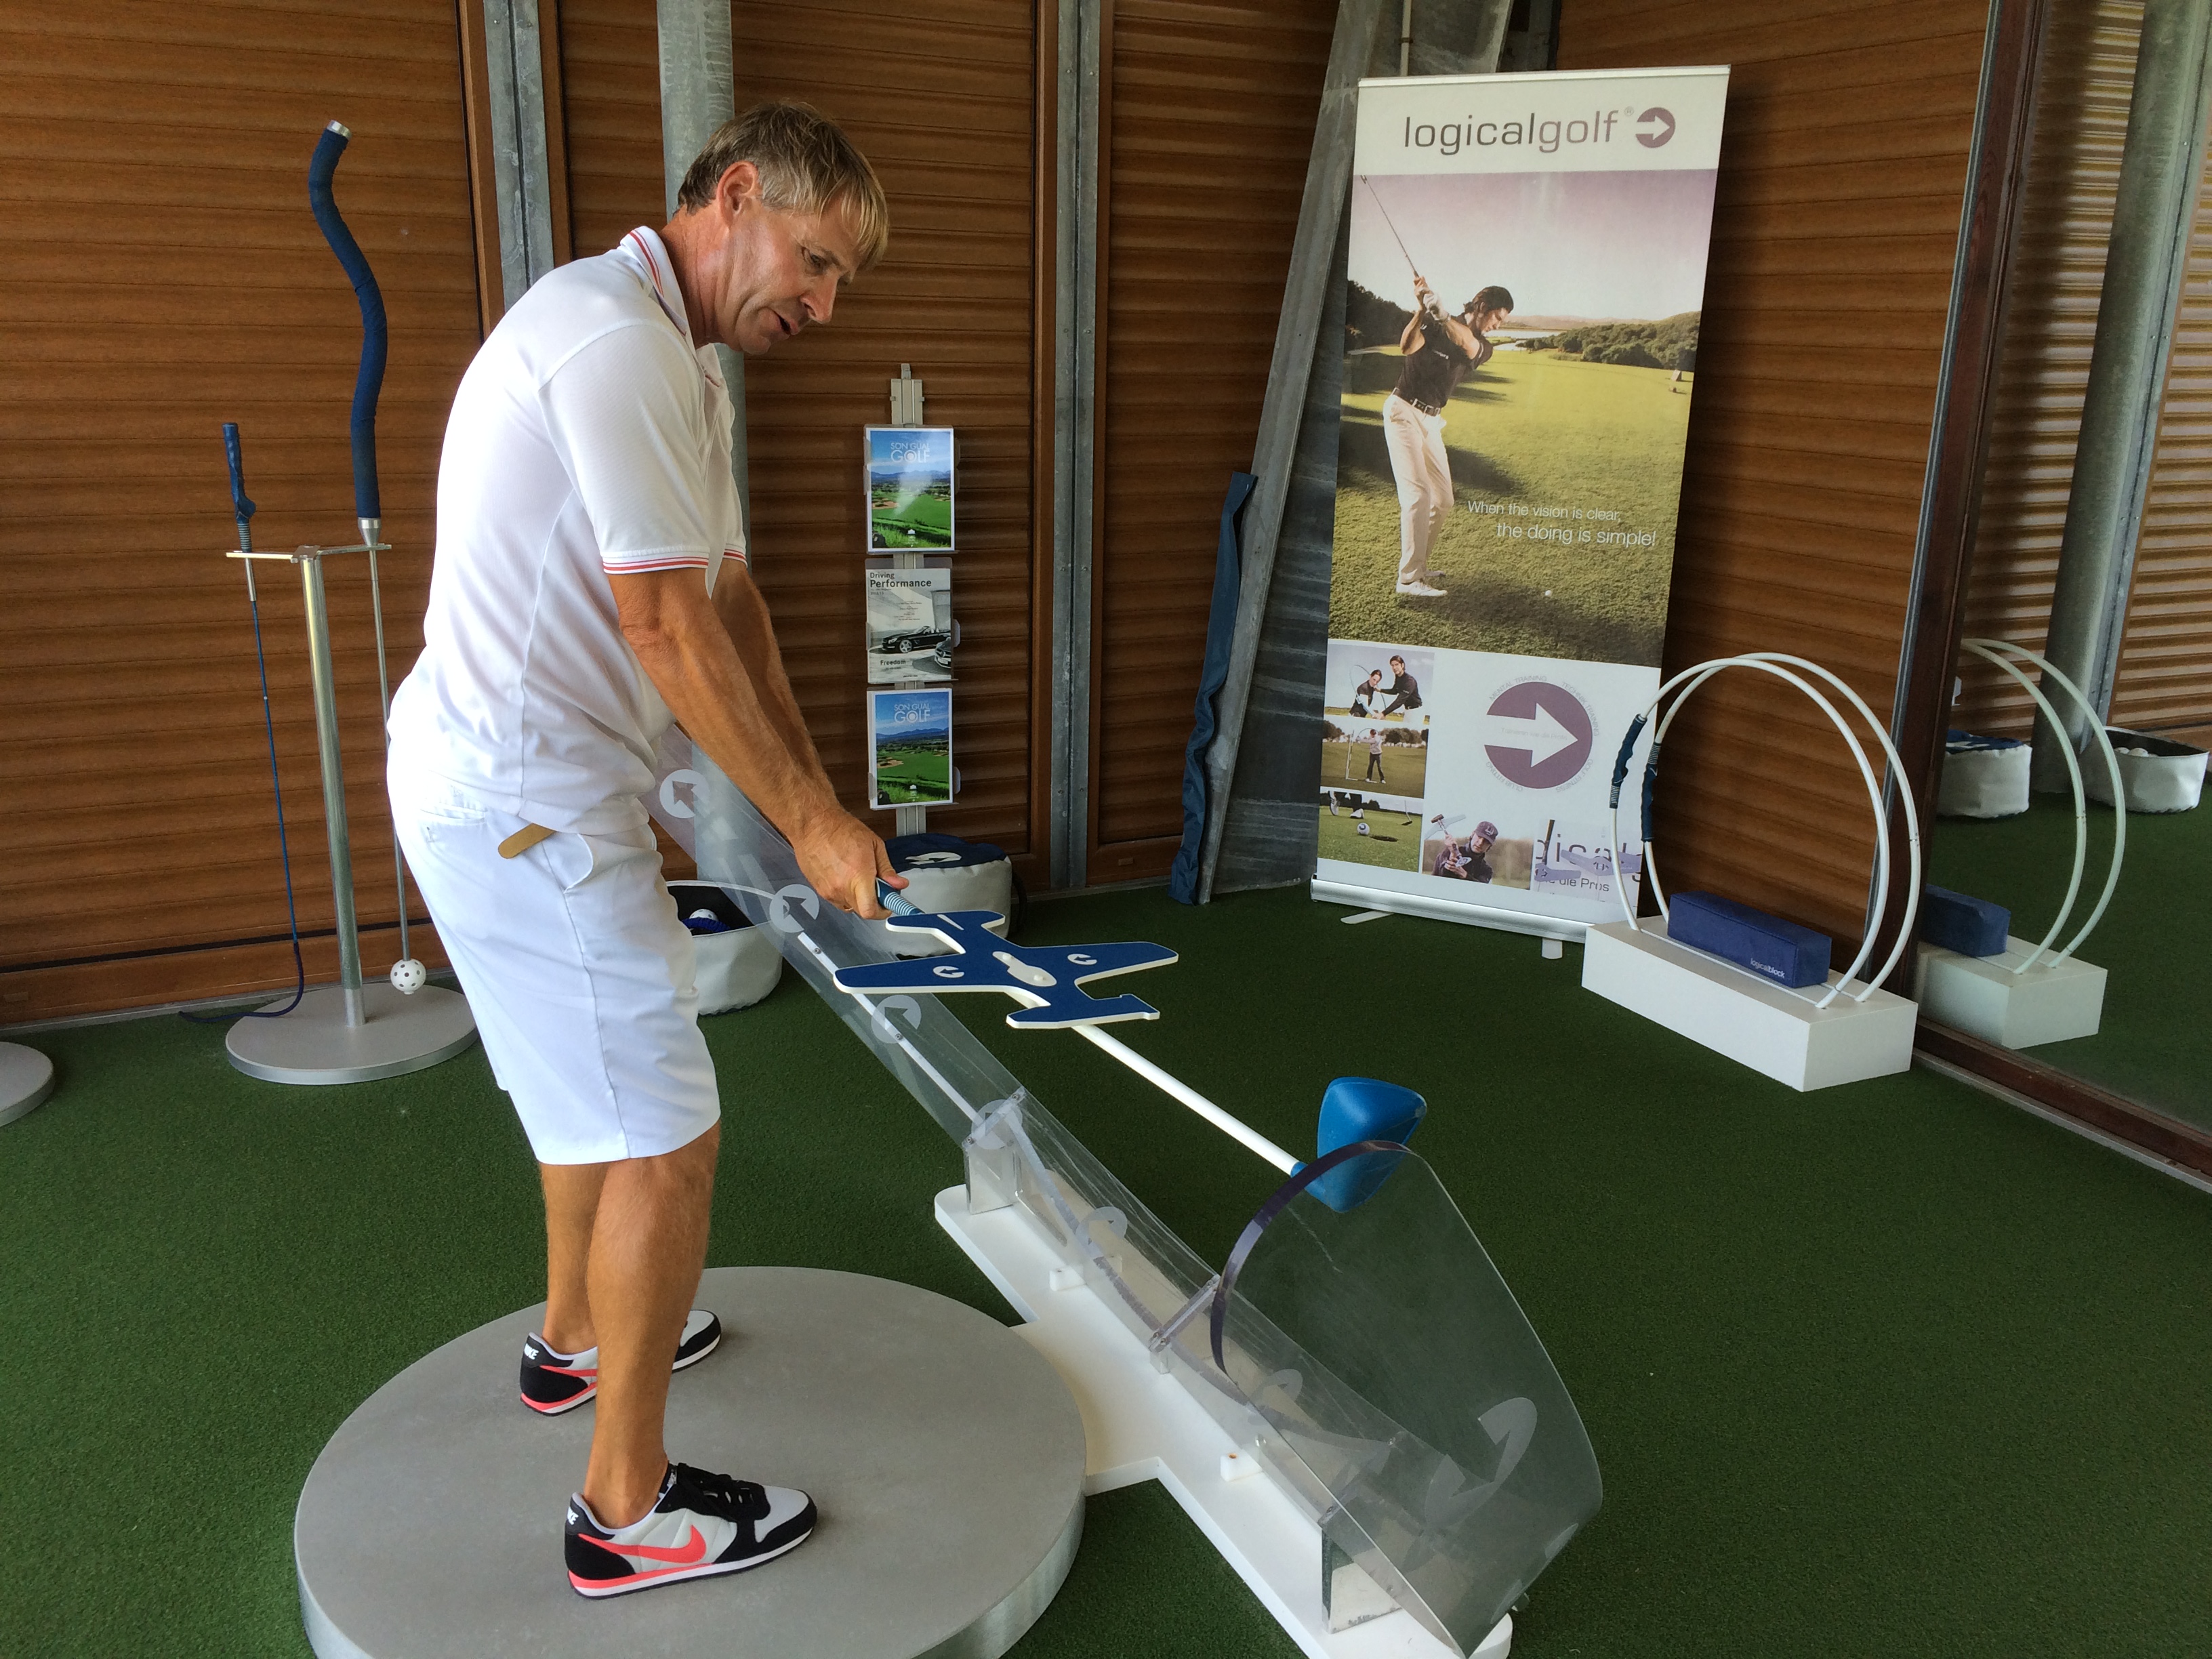 Son Gual pro Tim Holroyd explains the backswing in his Logicalgolf centre